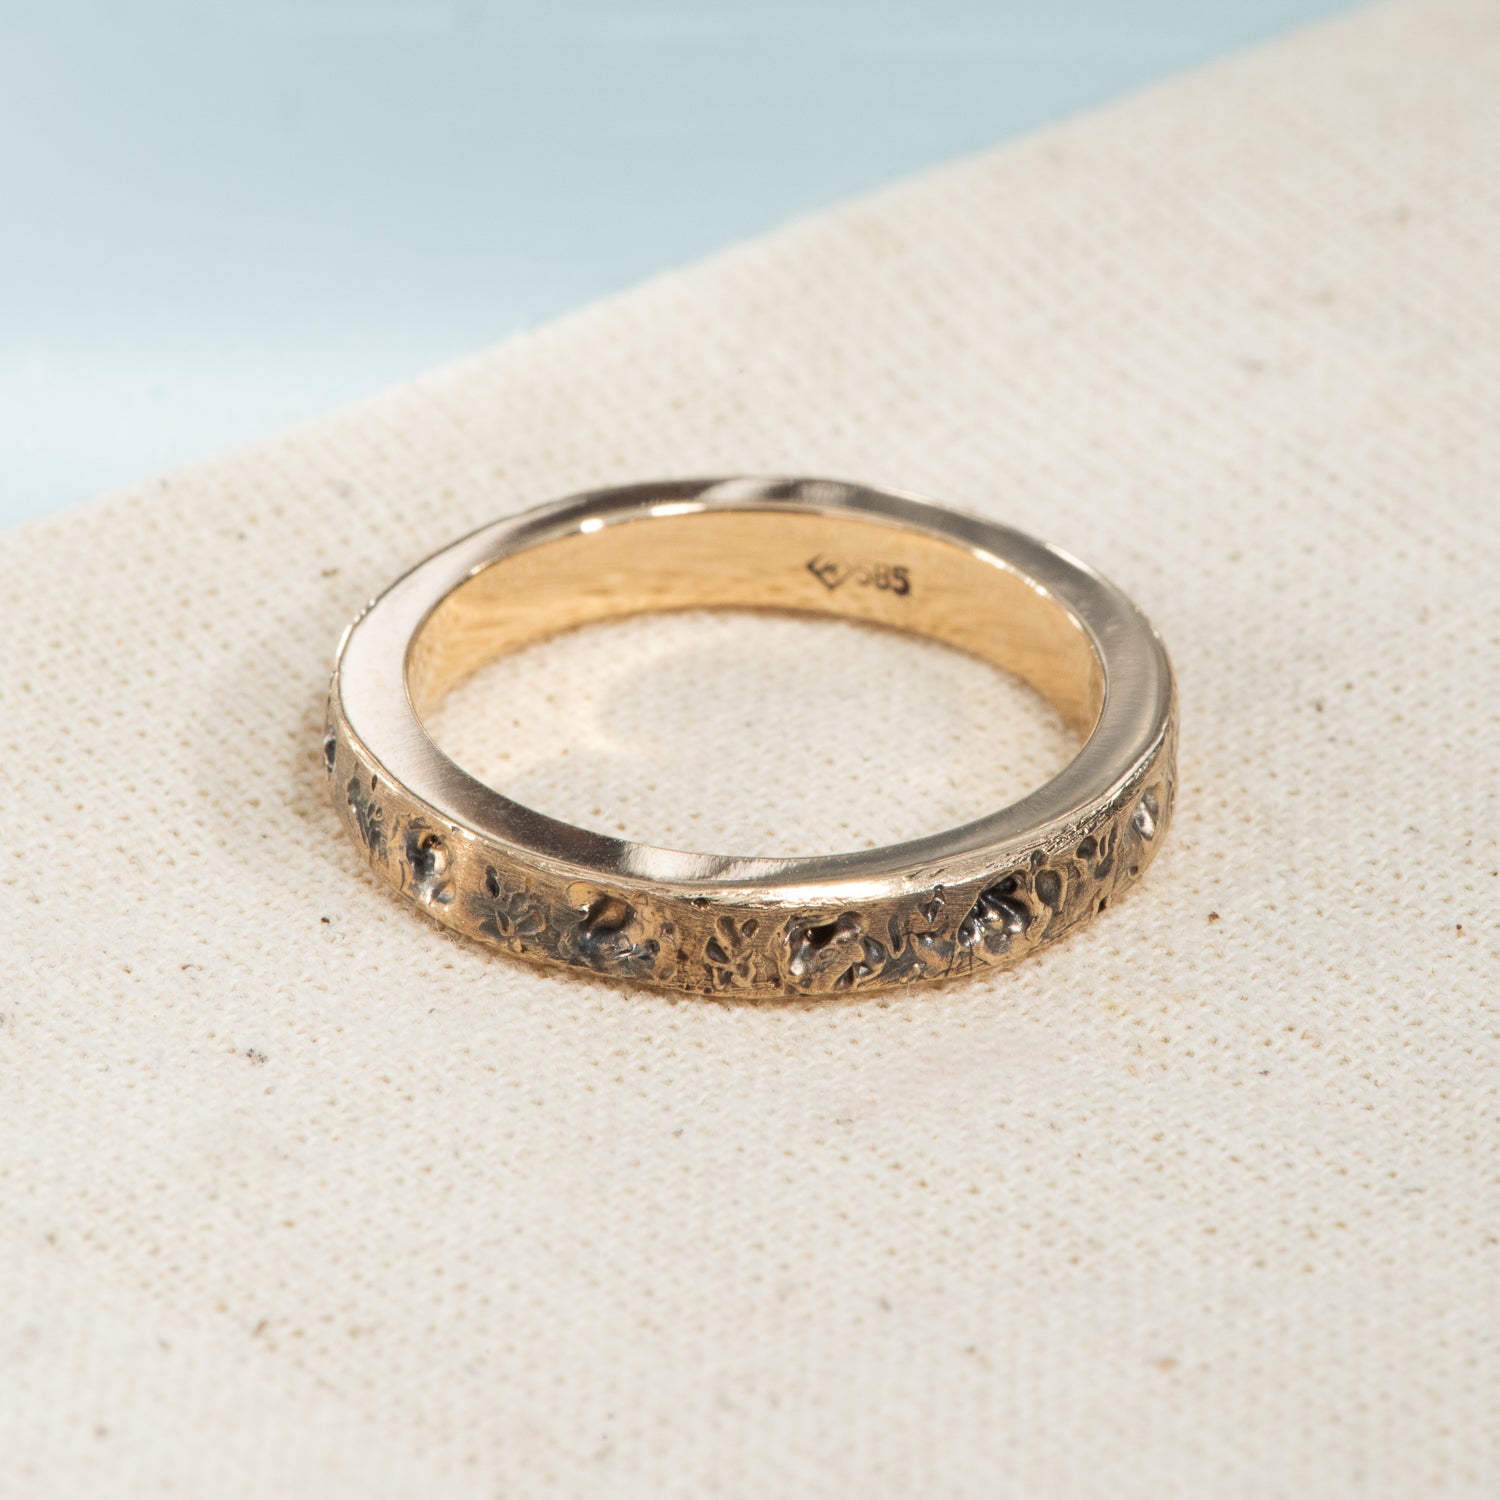 A lightly oxidized yellow gold band with a pitted, textured finish.